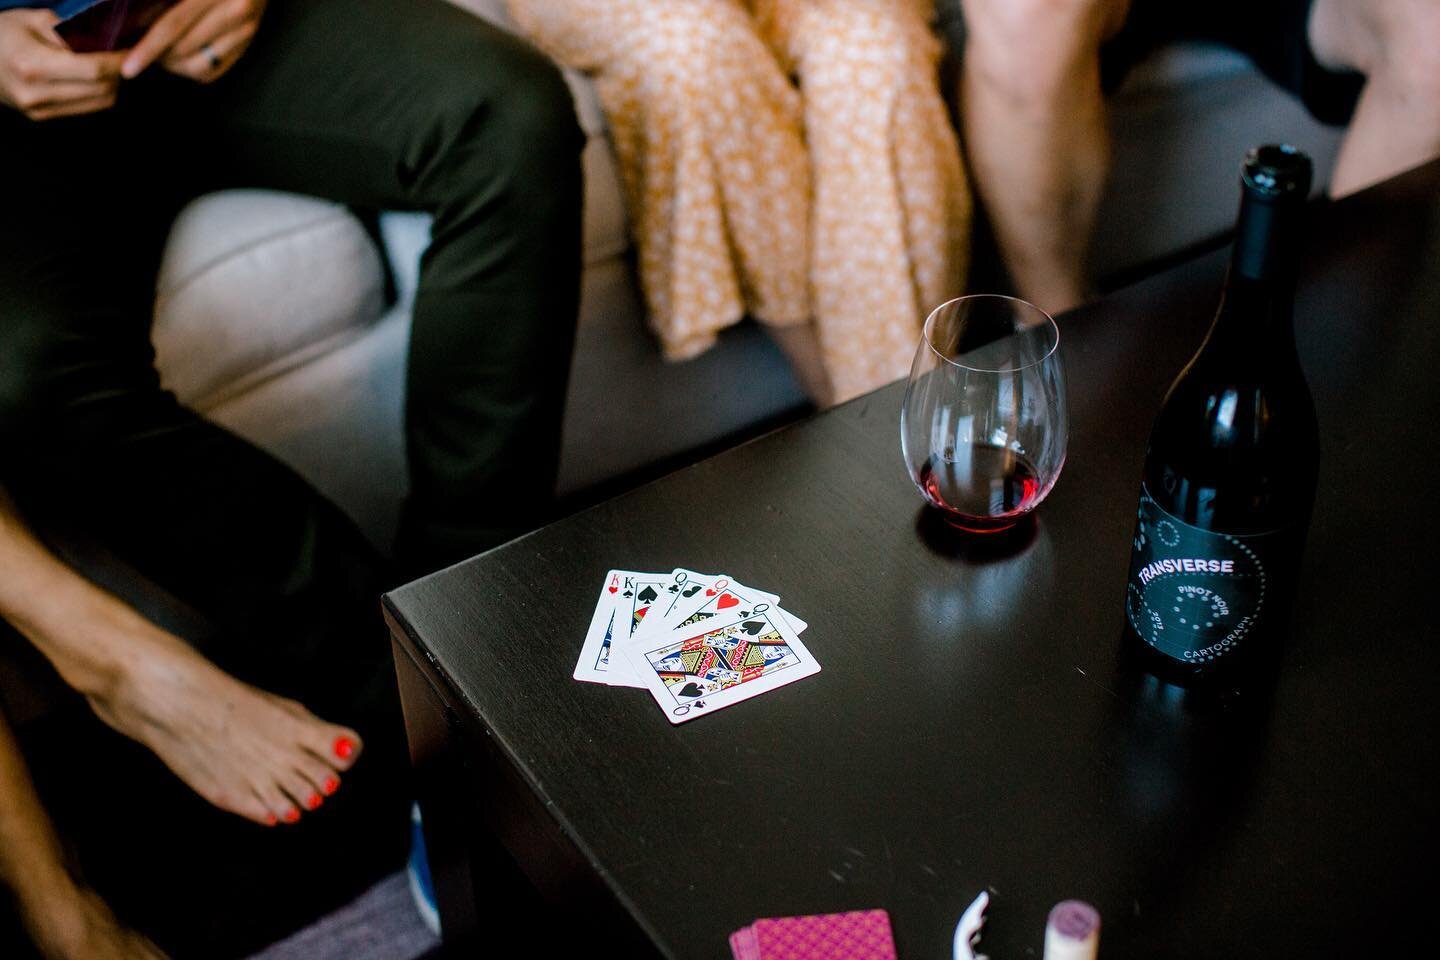 We&rsquo;ve got the spacious living room and the playing cards; you bring your friends and a good bottle of wine. Kick back and relax. It&rsquo;s the weekend! #ThisIsHealdsburg